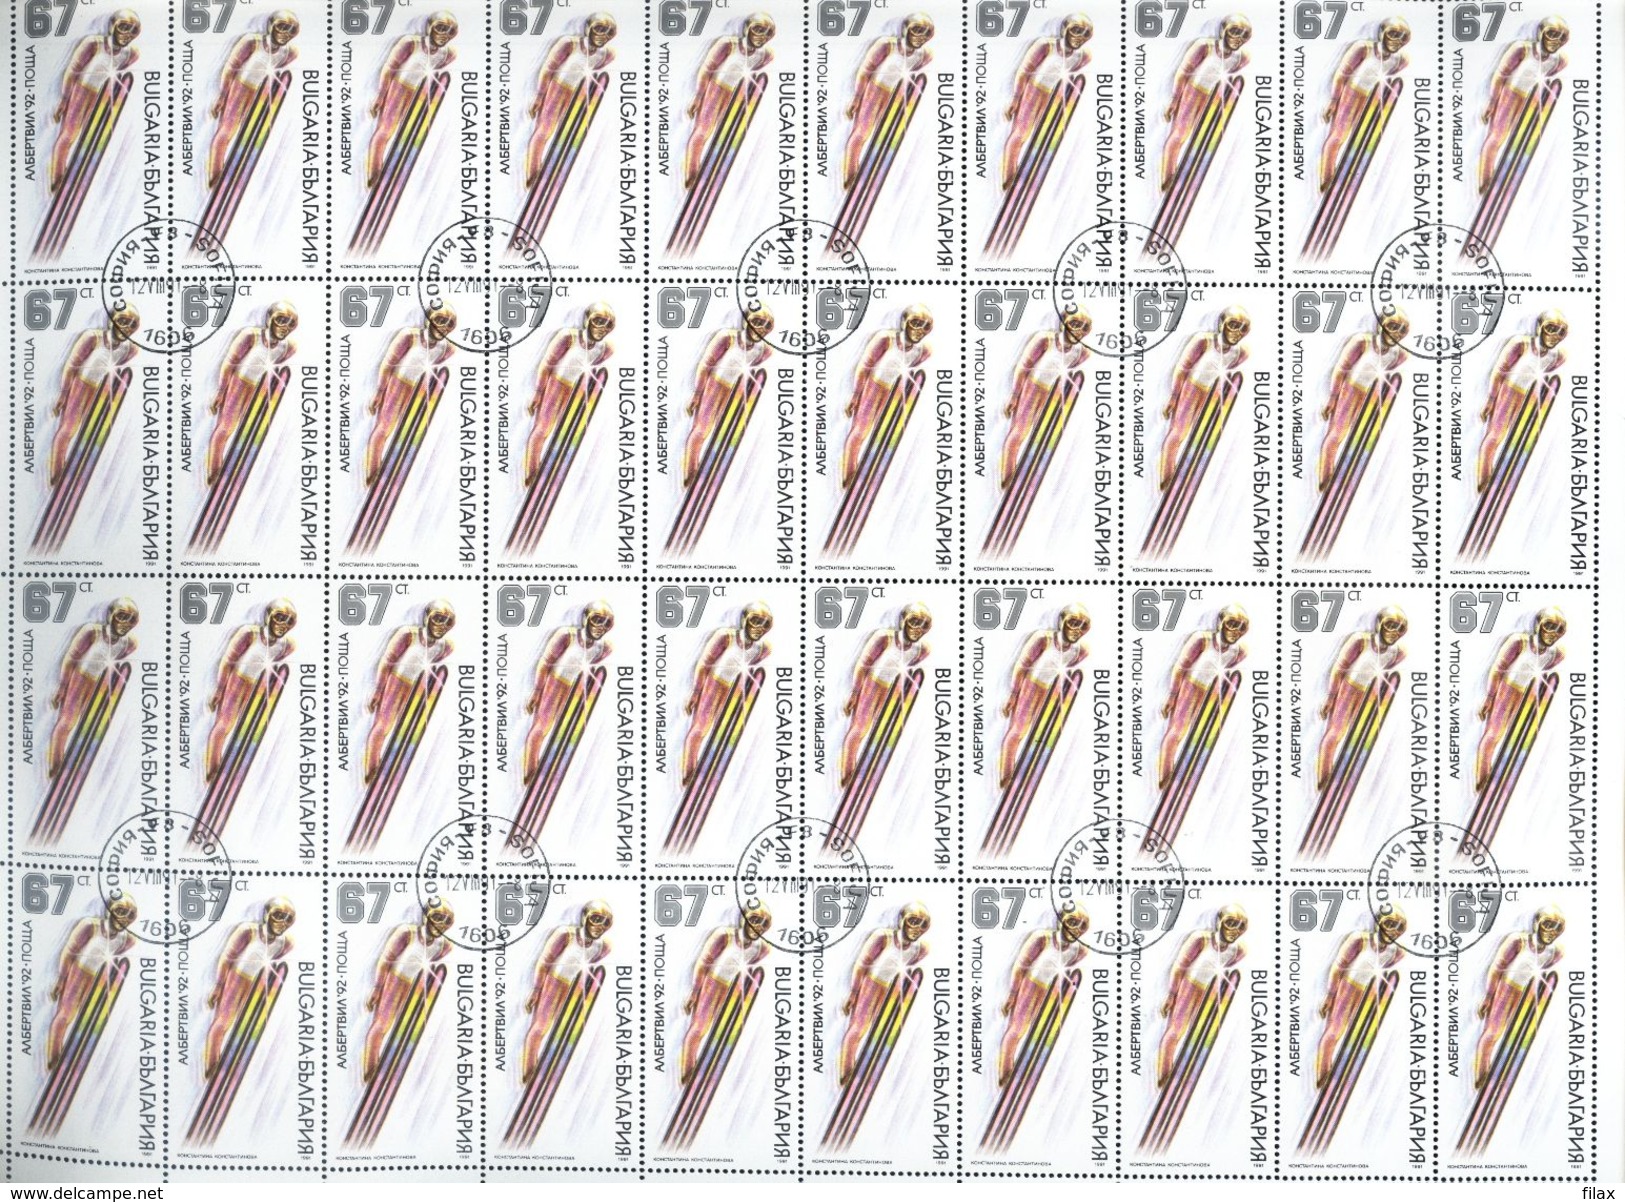 LOT BGCTO03 - CHEAP CTO STAMPS IN SHEETS (for packets or resale)